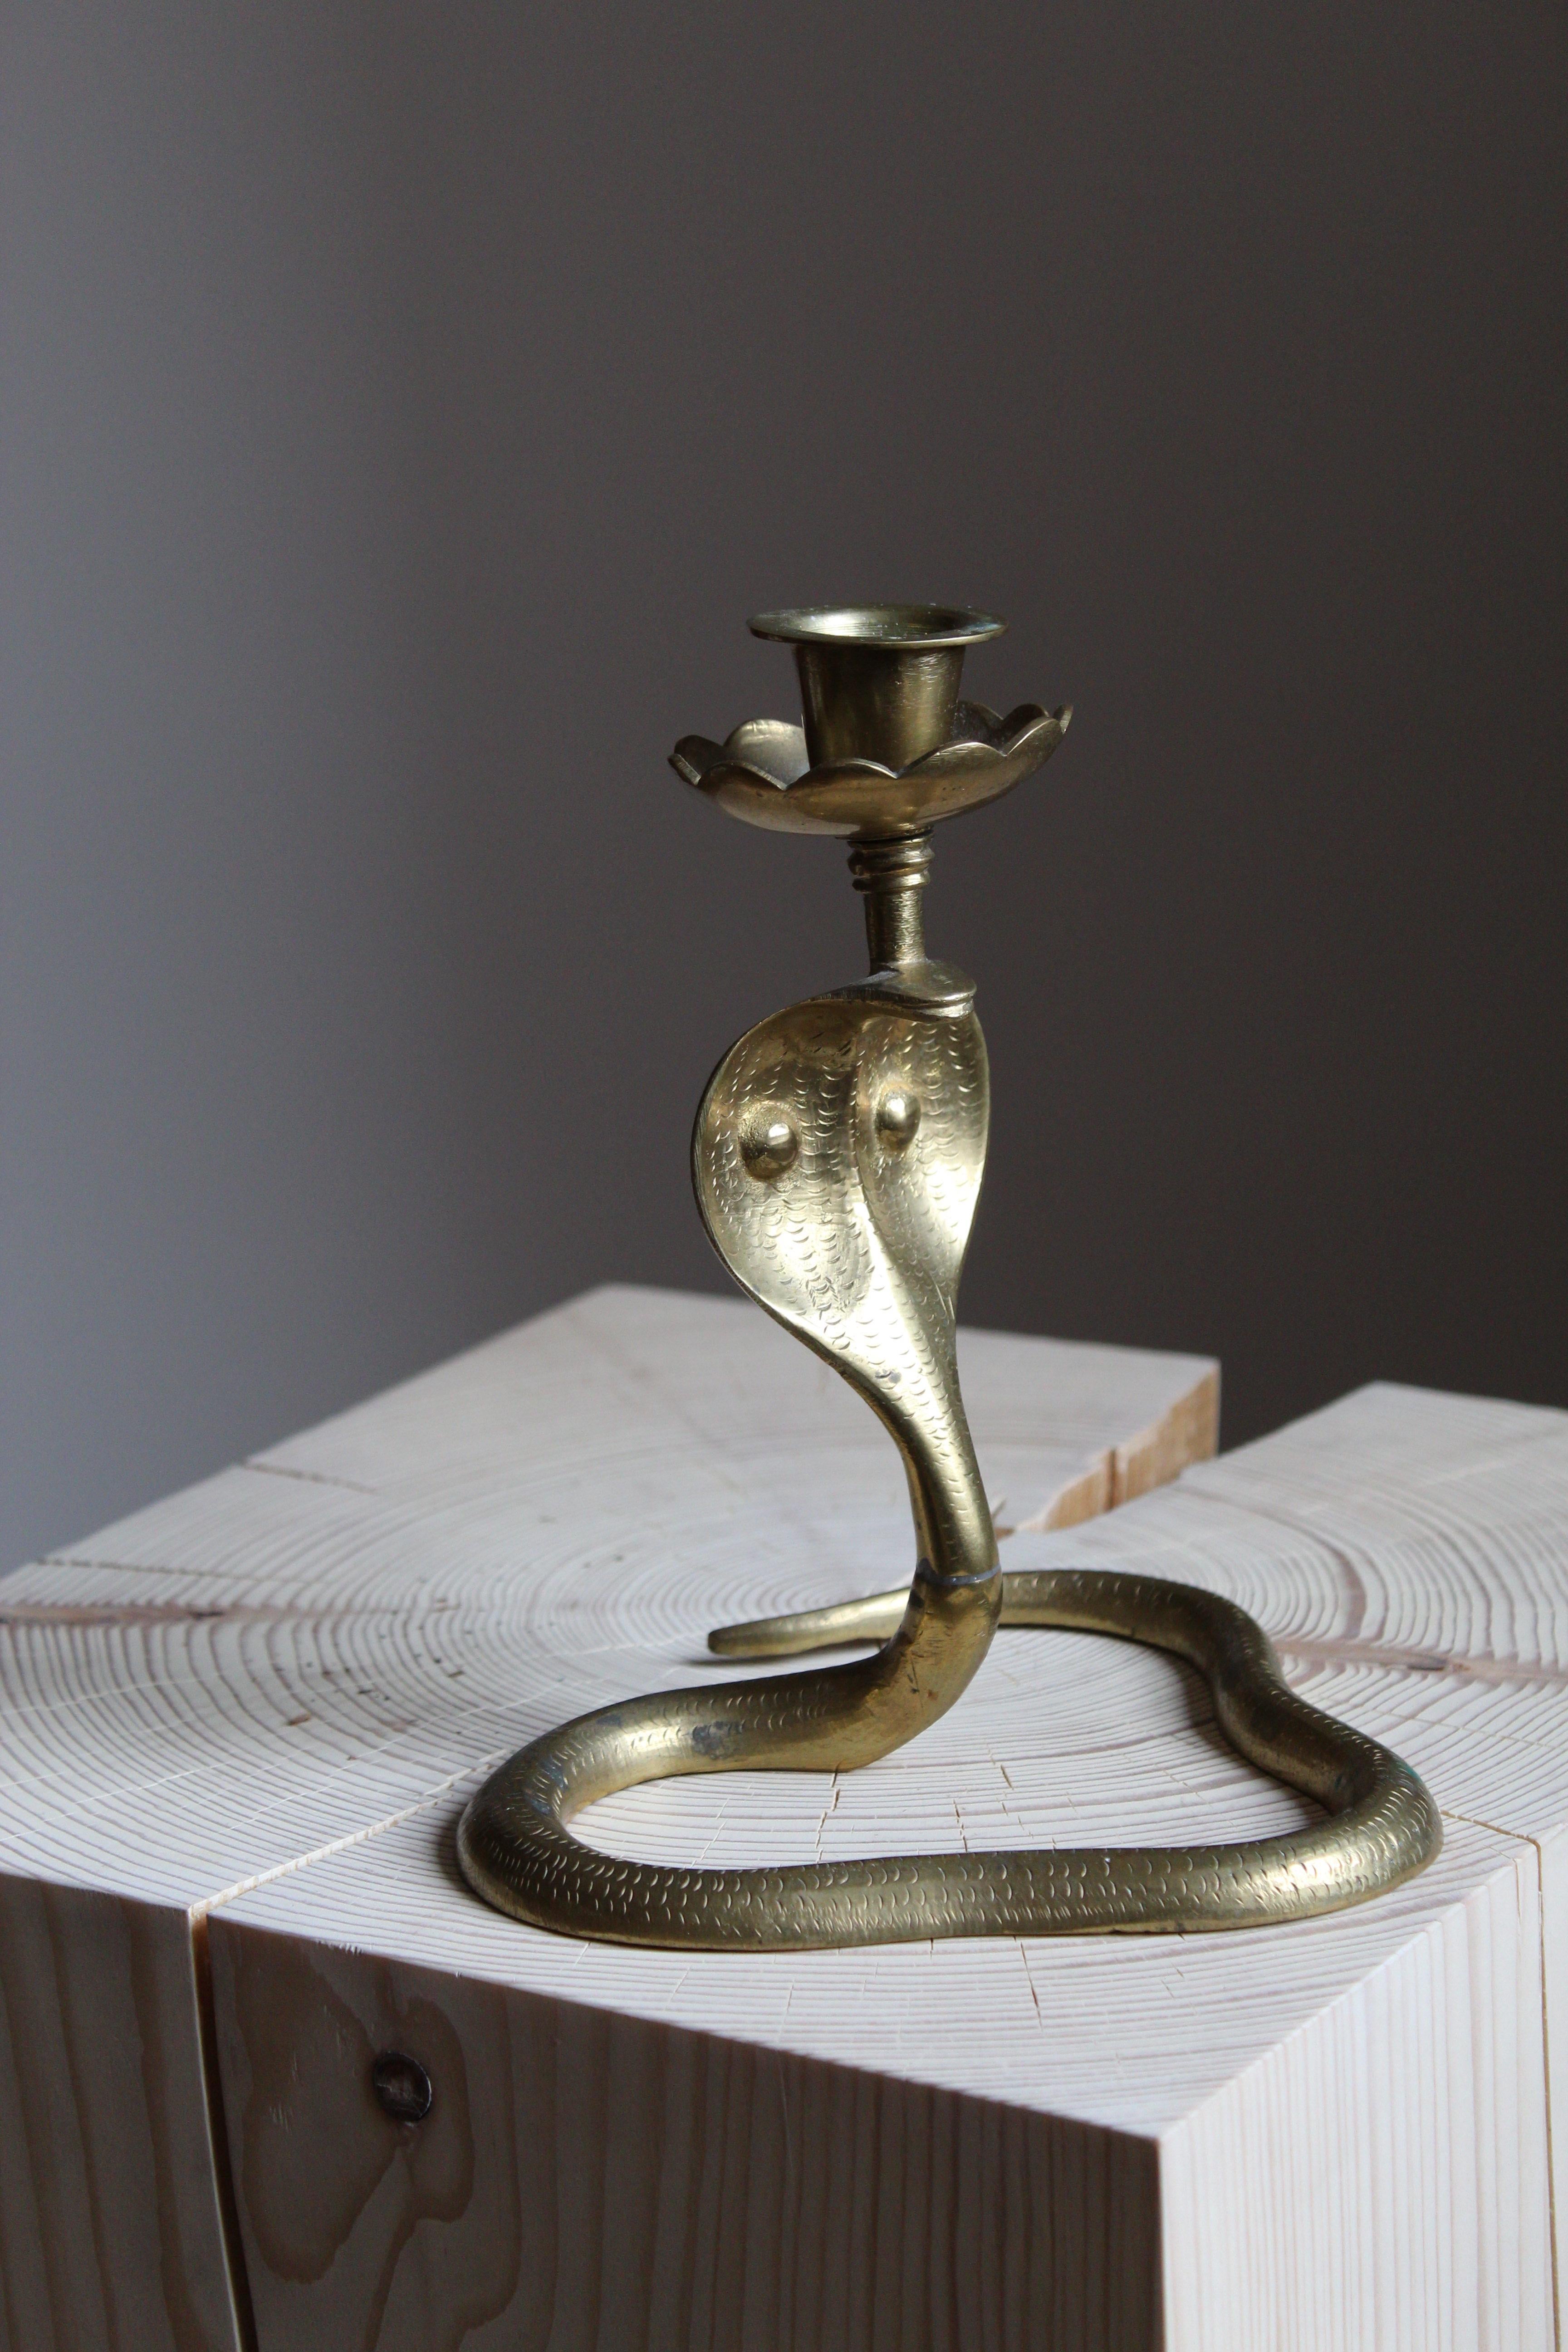 An organic candlestick, in the form of a cobra snake. Likely produced in Sweden, 1940s.

Signed, unintelligible.